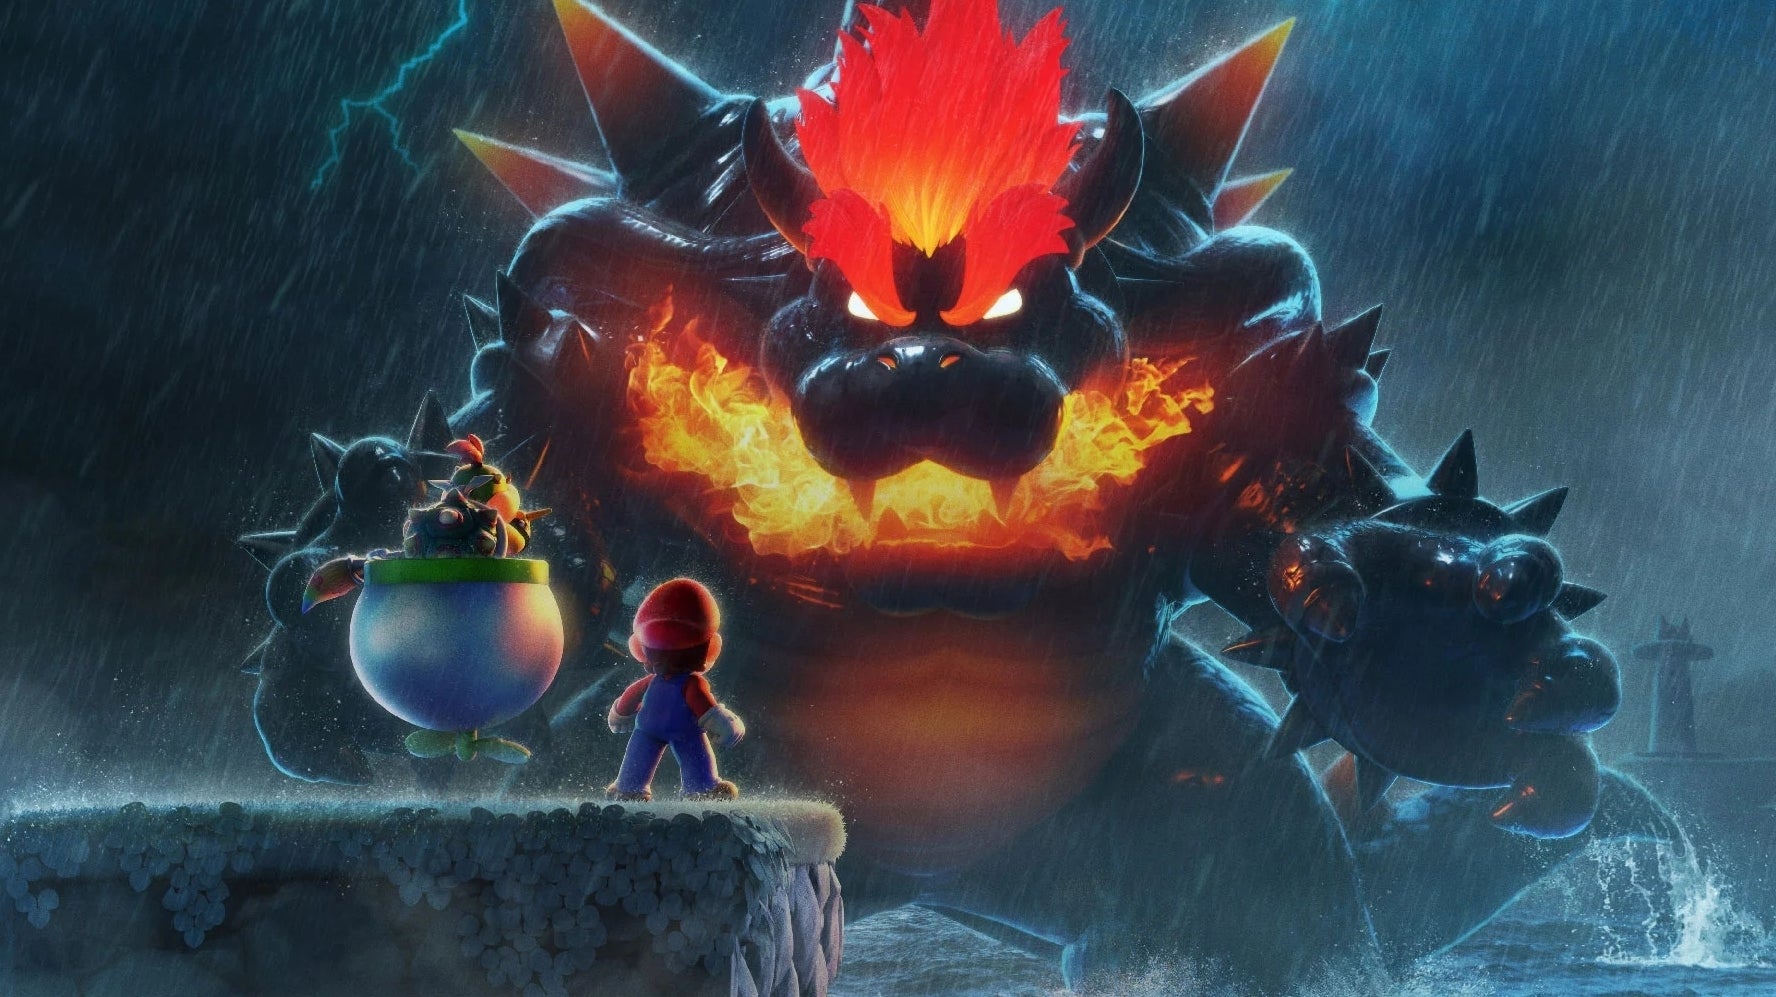 Image for Super Mario 3D World + Bowser's Fury review - Mario at its most madcap and inventive